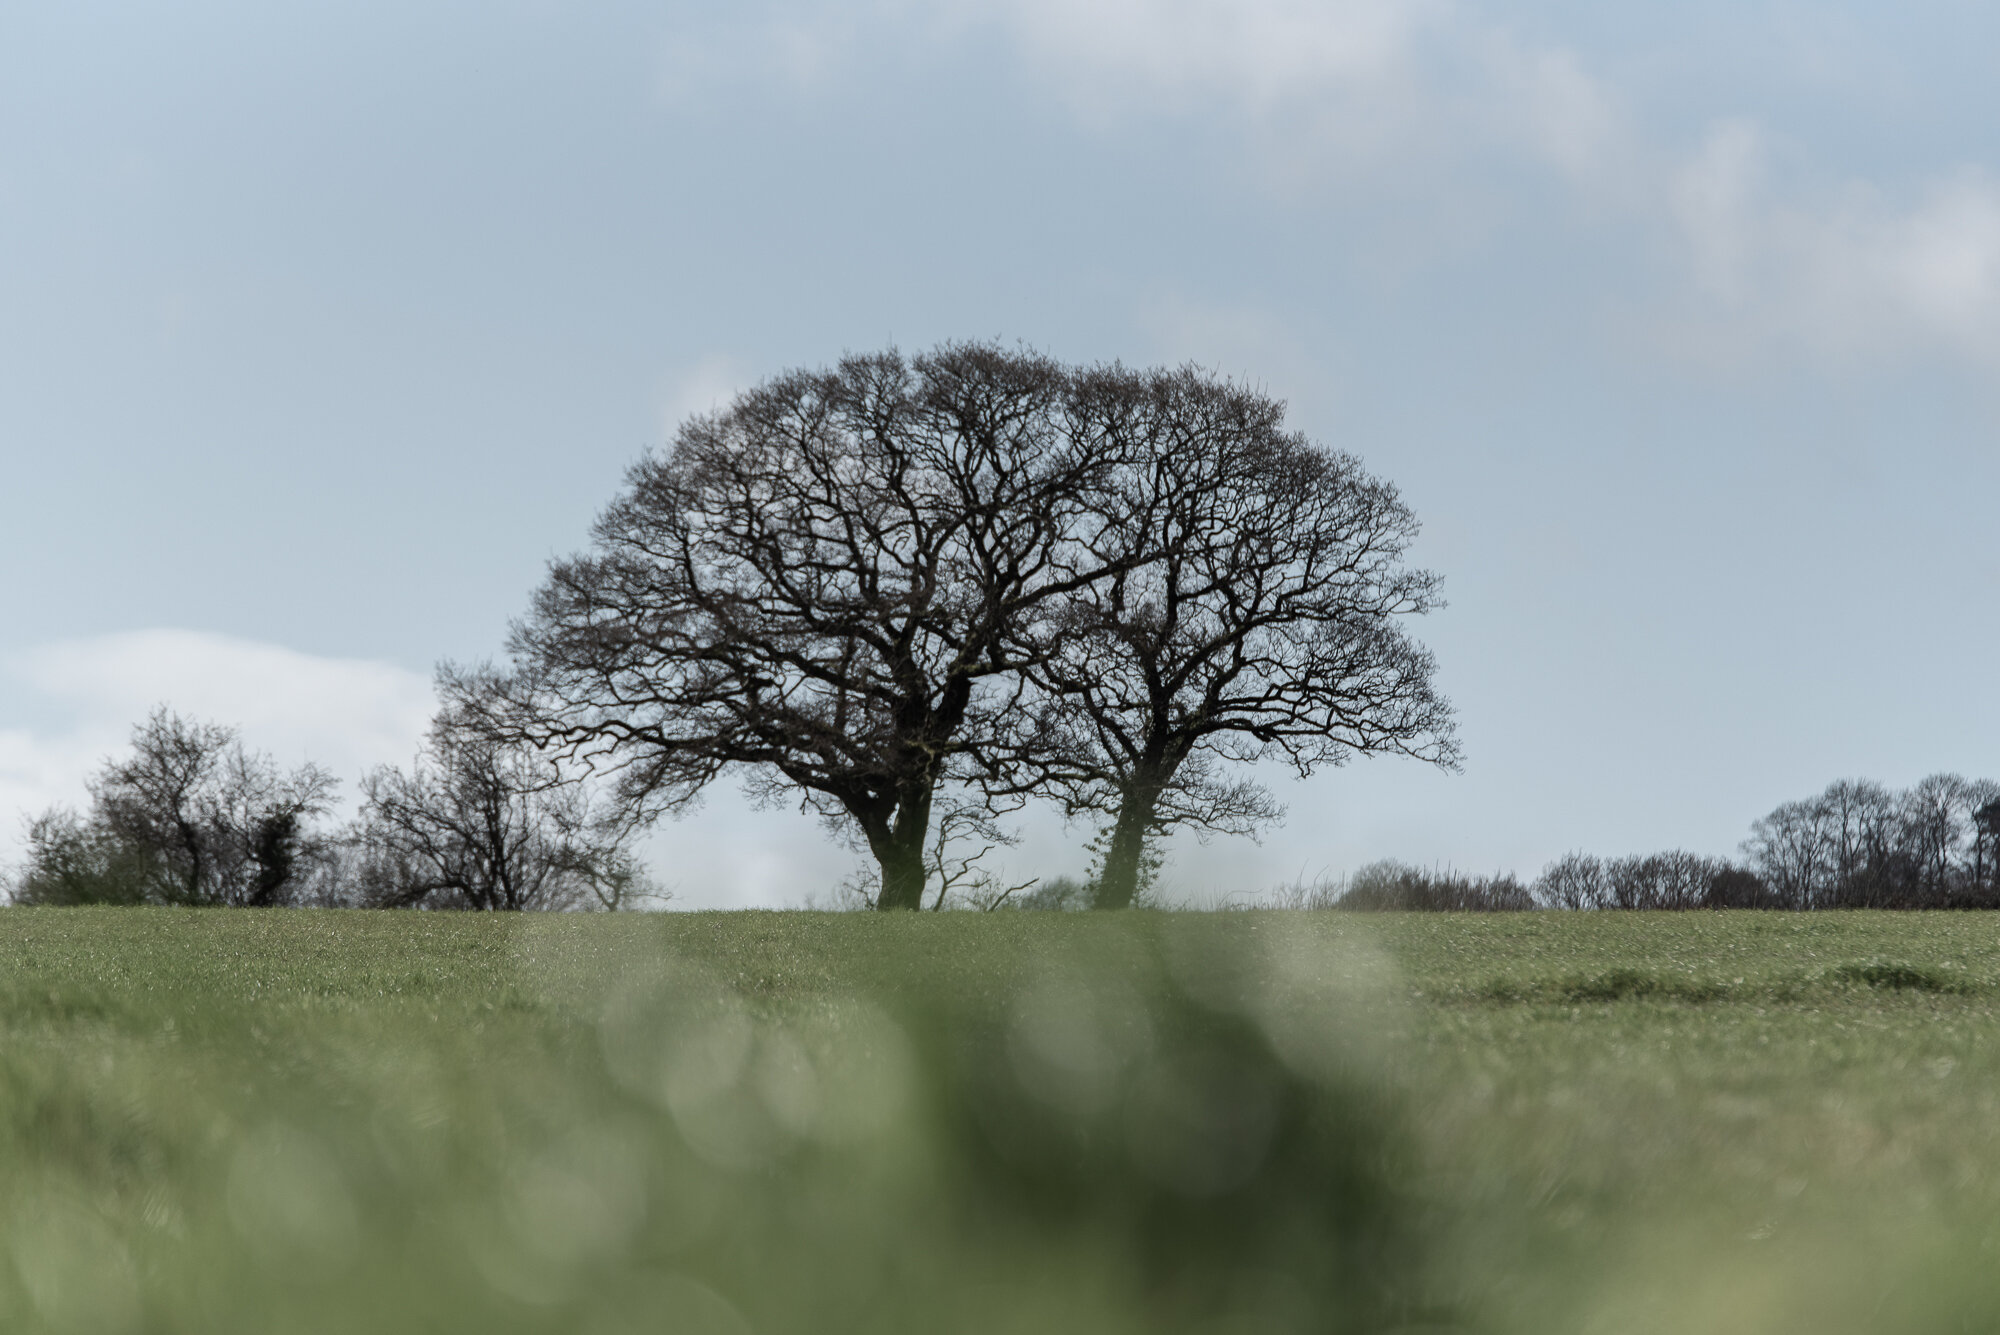 Two Oaks in a transparent hedge